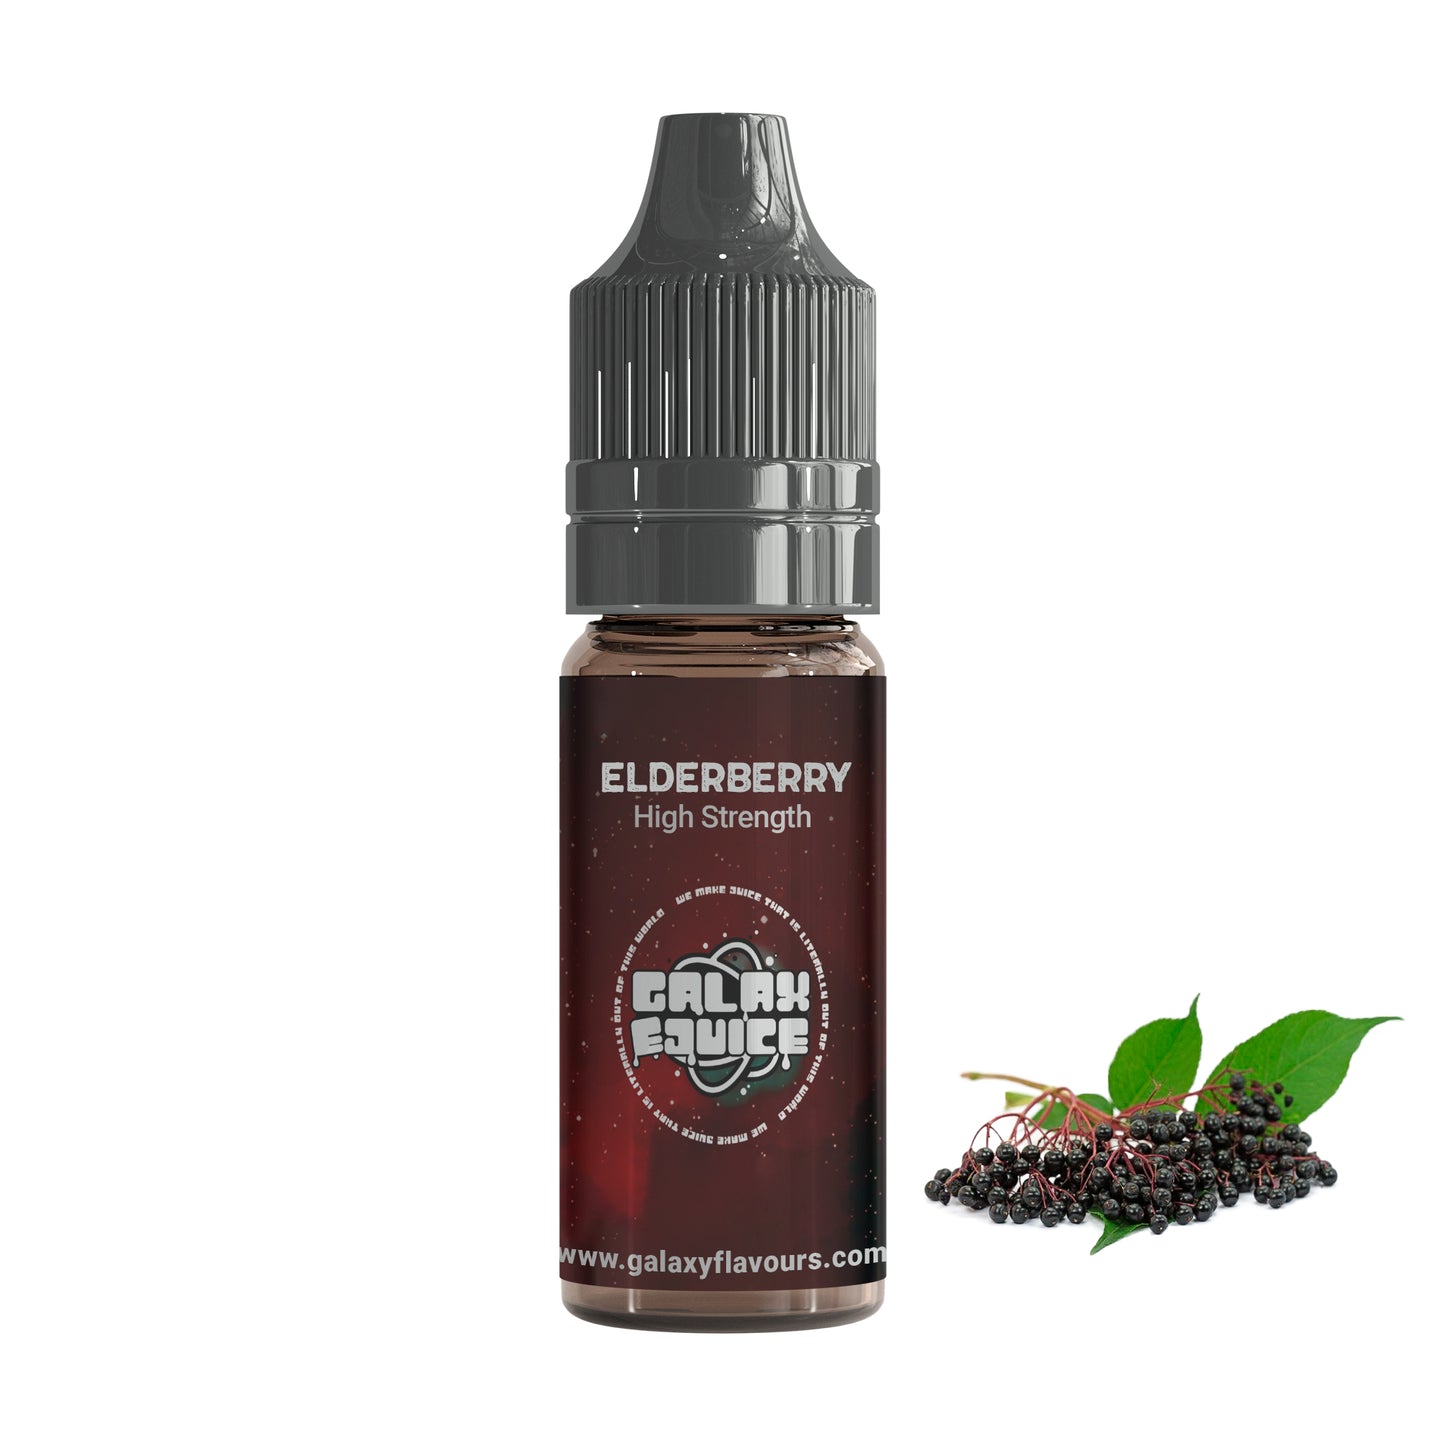 Elderberry High Strength Professional Flavouring.